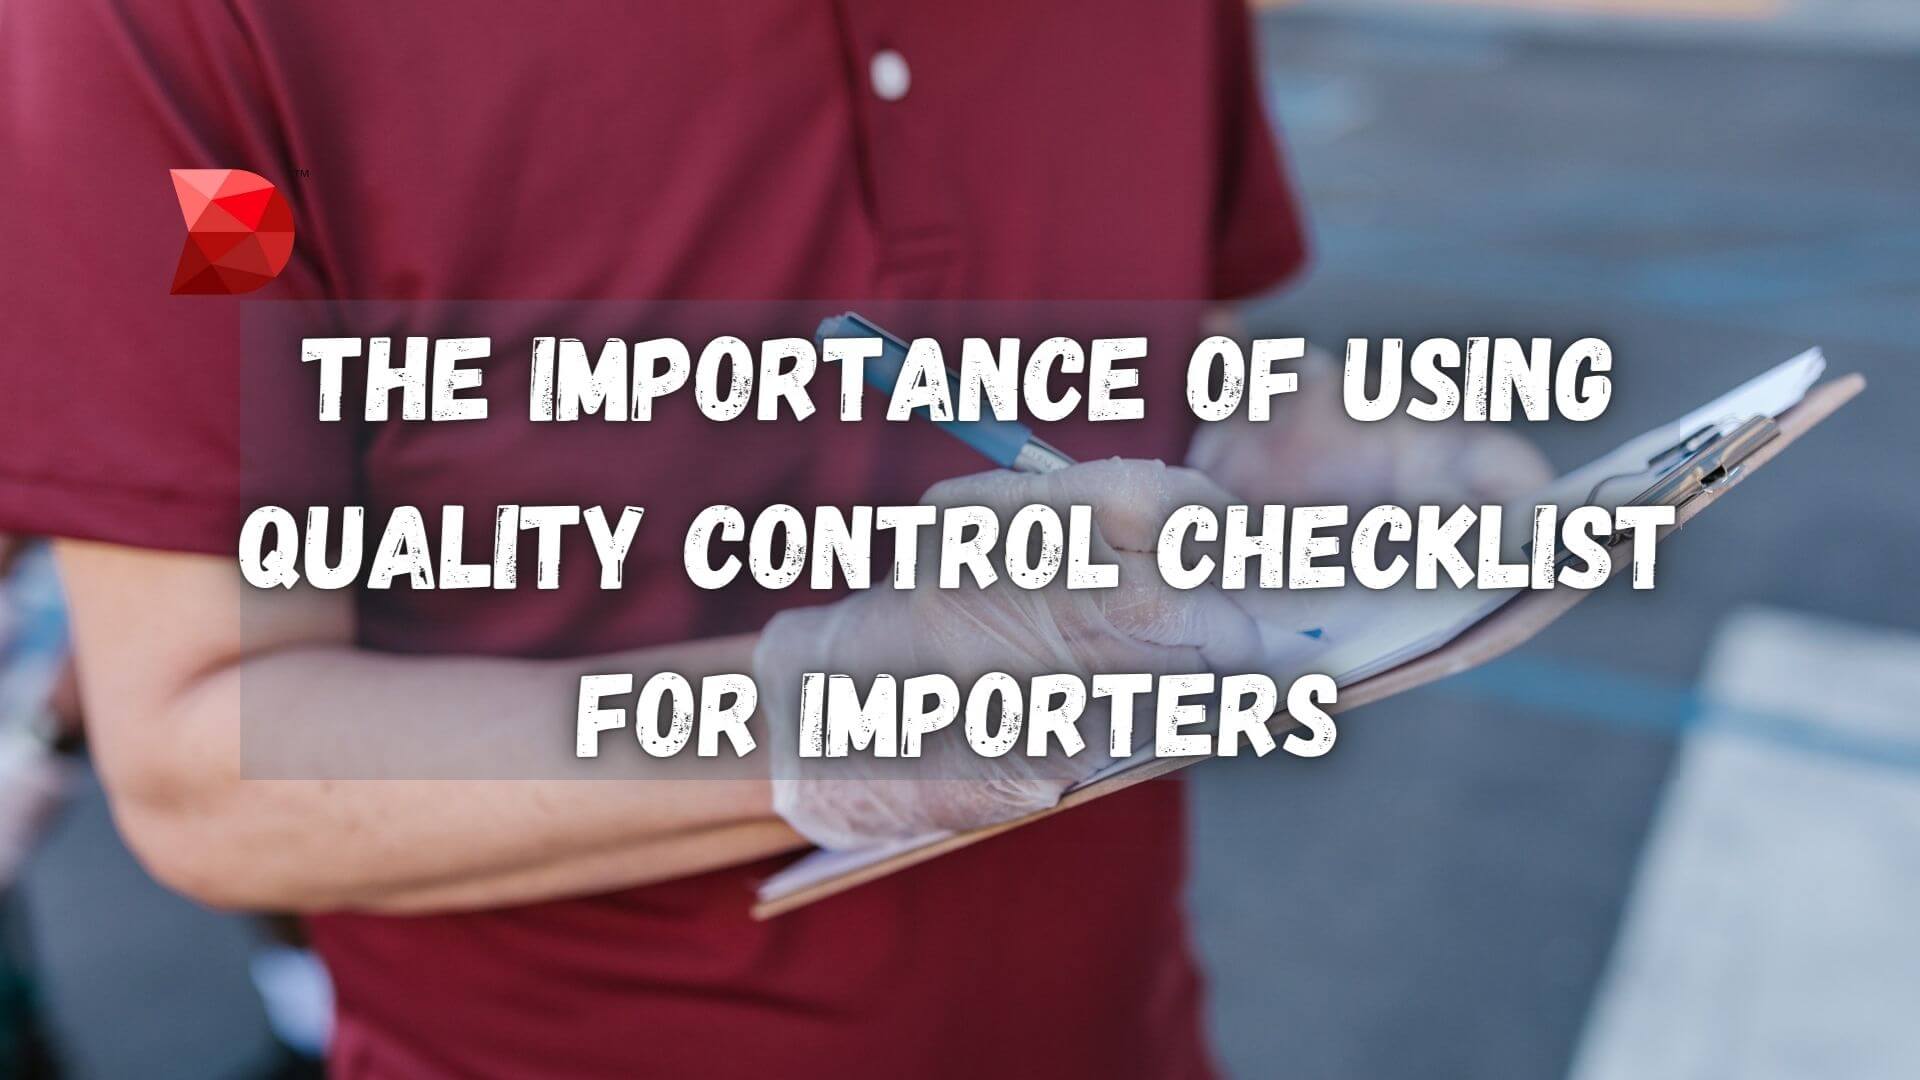 We will discuss why quality control is so important and why you should use a quality control checklist. Read here to learn more!